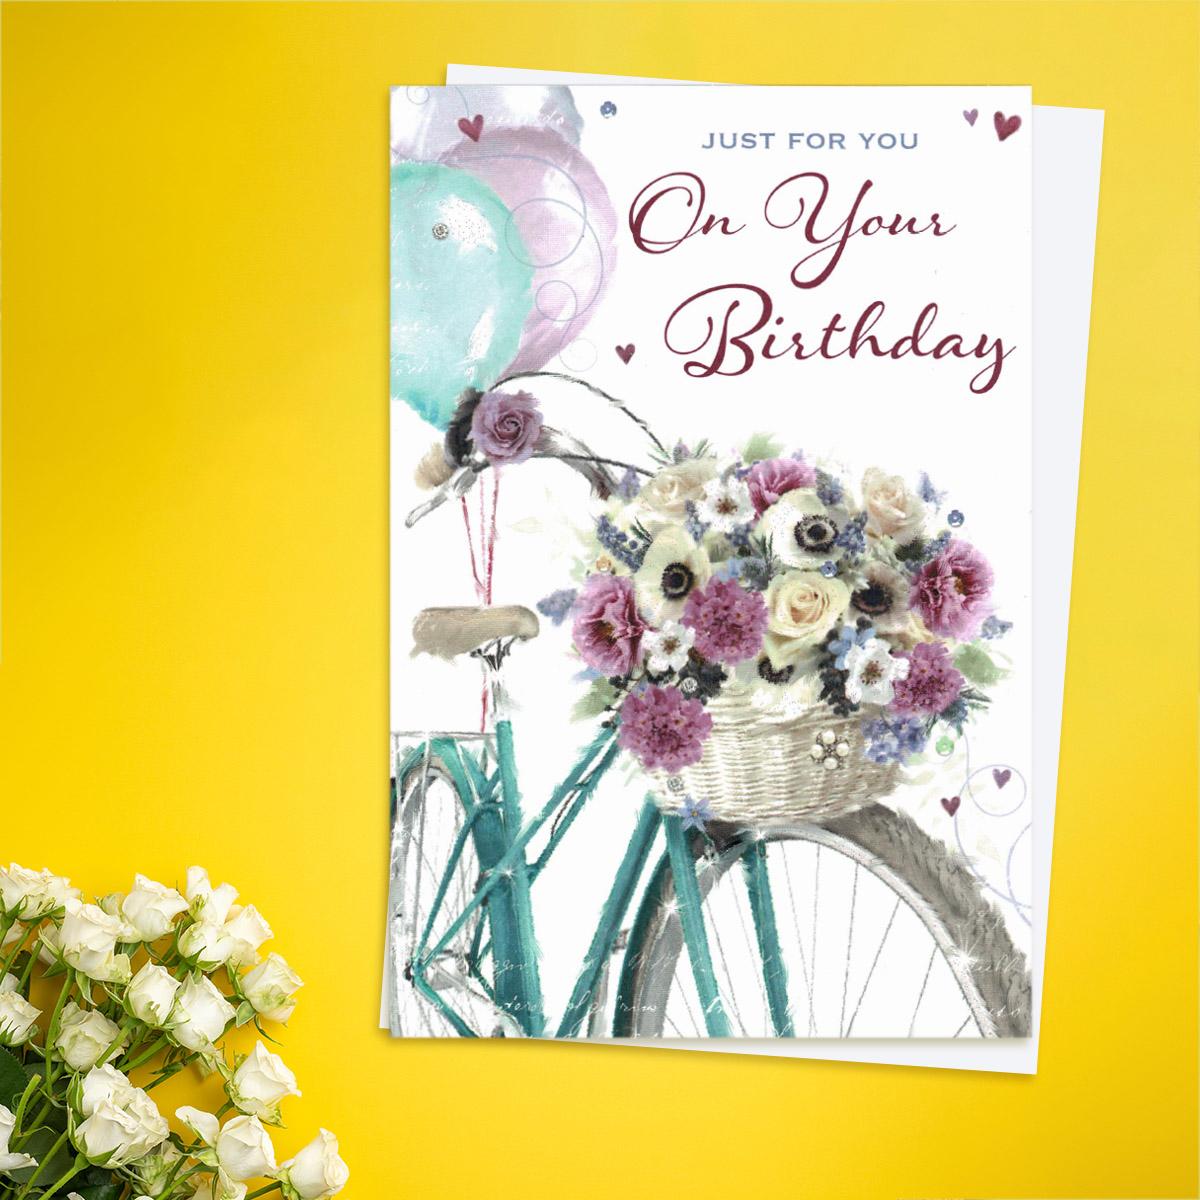 Just For You Cycle, Flowers & Balloons Card Front Image